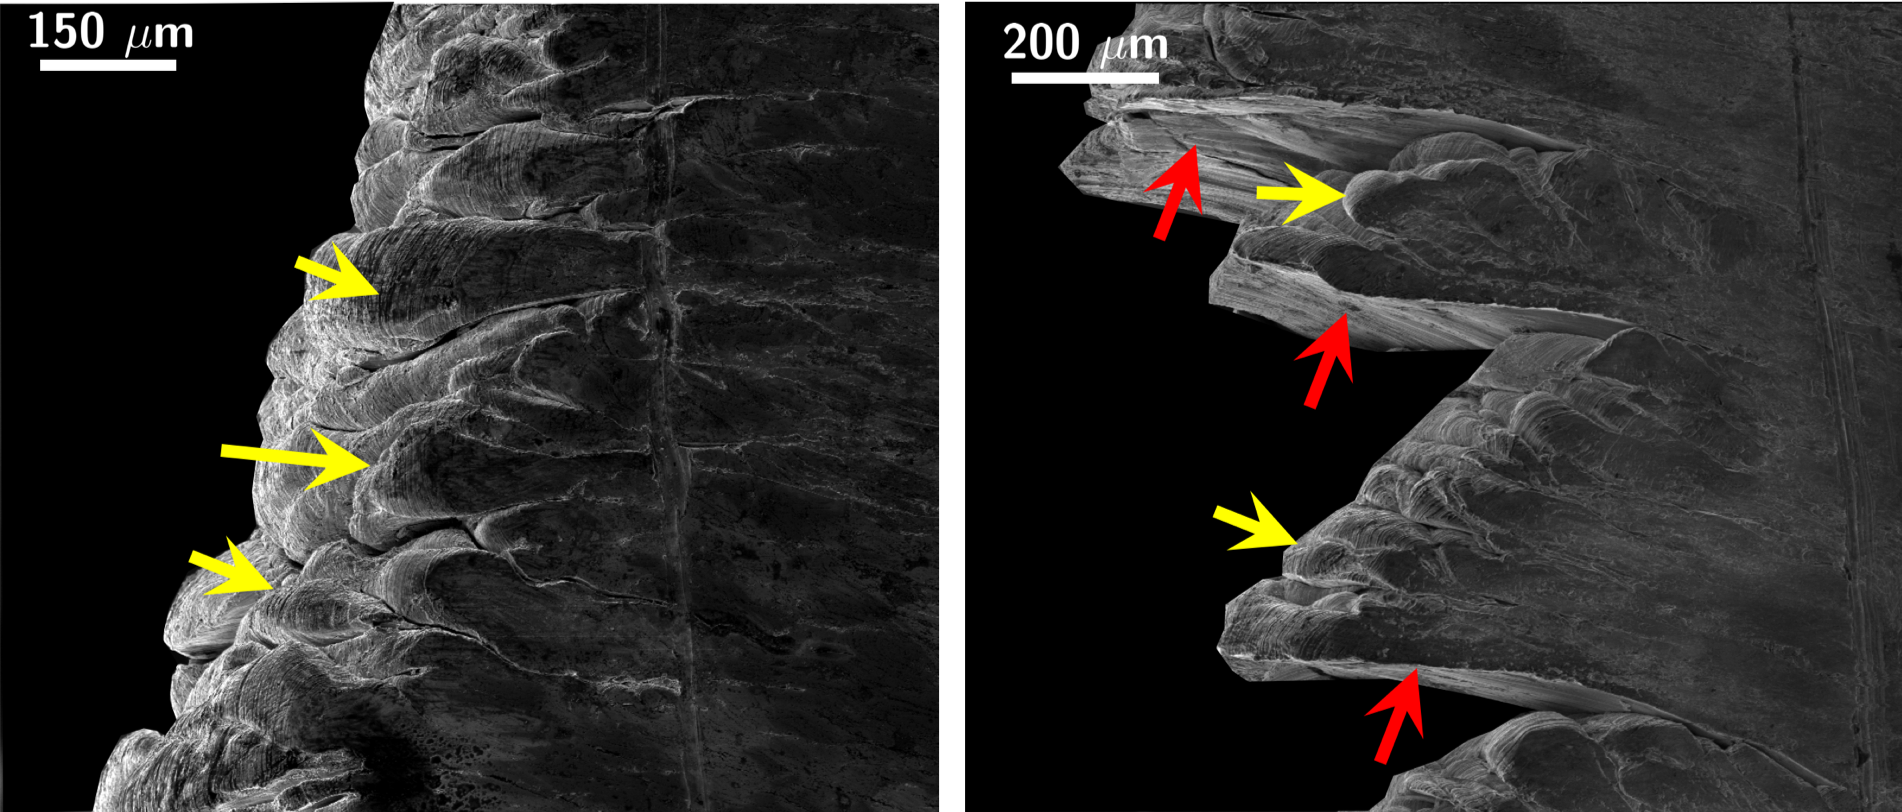 Designer surface-active media induce embrittlement in ductile and highly strain-hardening metals. Machining chip obtained without and with application of surface-active media: yellow arrows indicate folds in the chip, red arrows indicate media induced cracks.